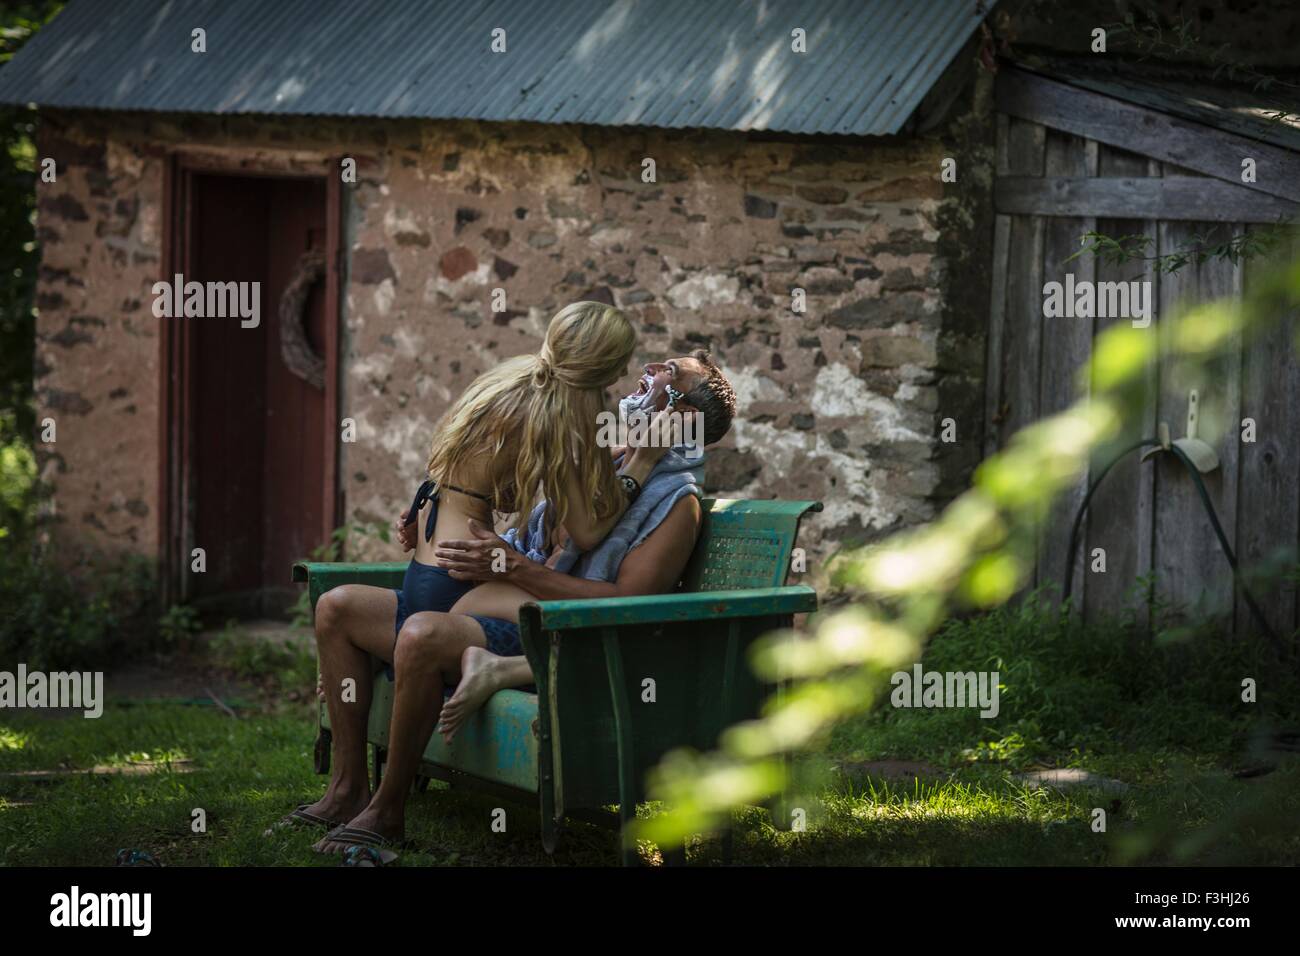 Young woman in bikini sitting on boyfriends lap shaving his chin at holiday cottage Stock Photo